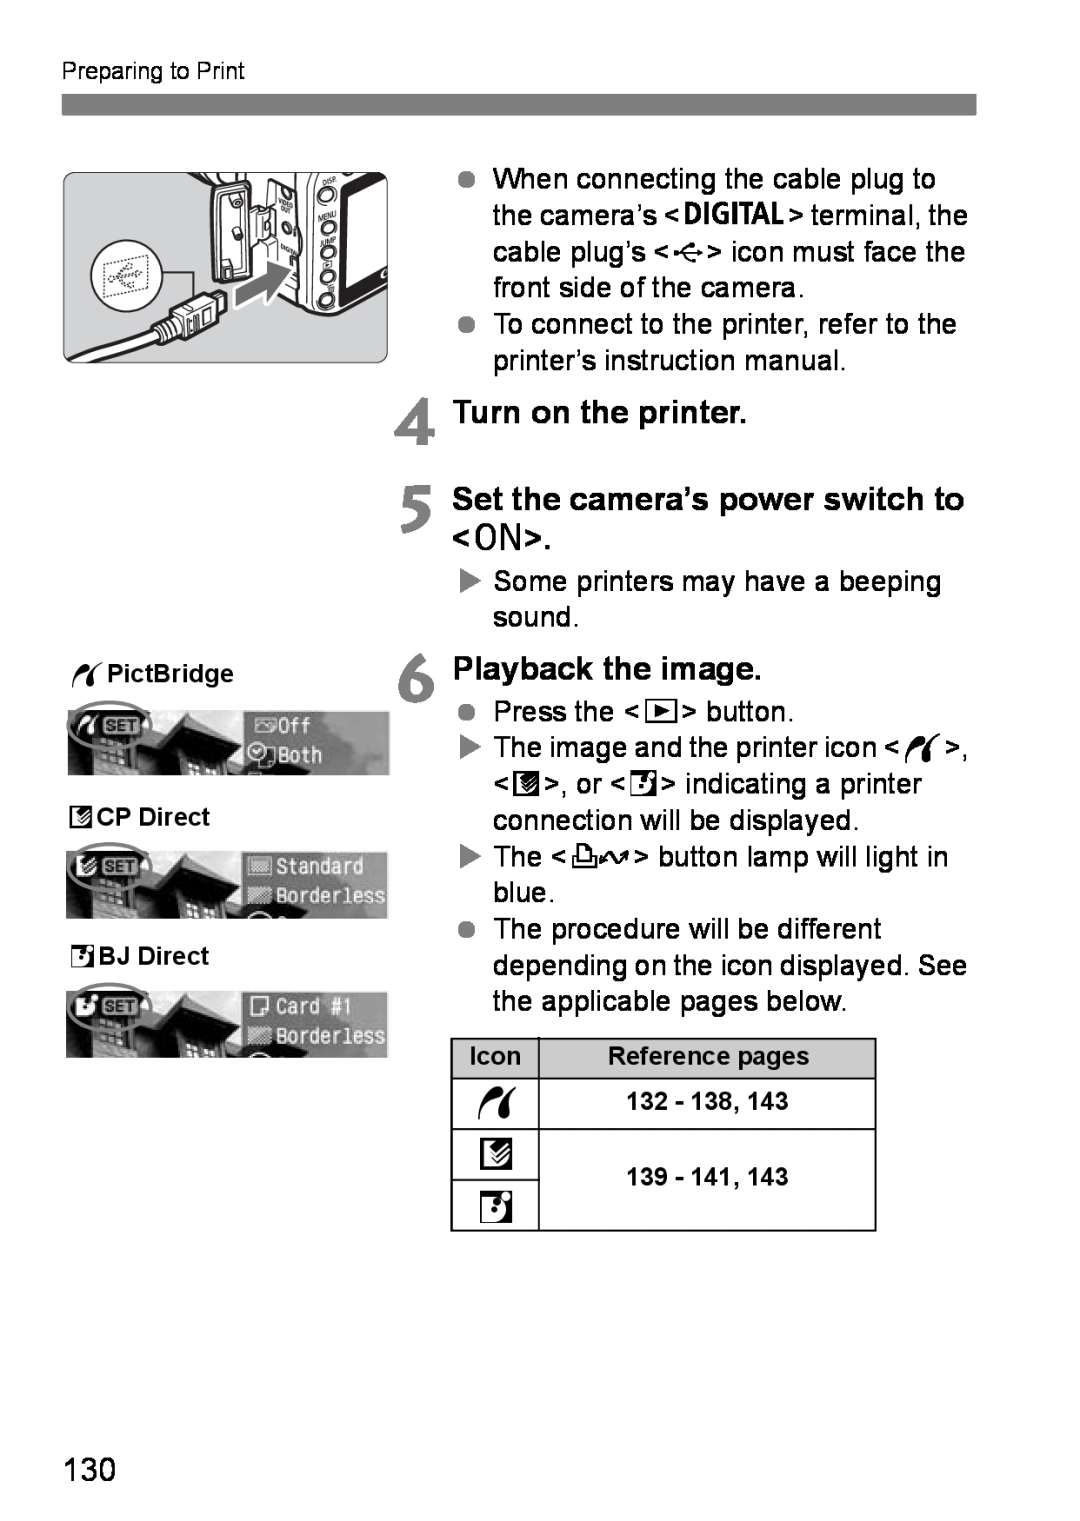 Canon EOS DIGITAL REBEL XTI instruction manual Turn on the printer 5 Set the camera’s power switch to, Playback the image 